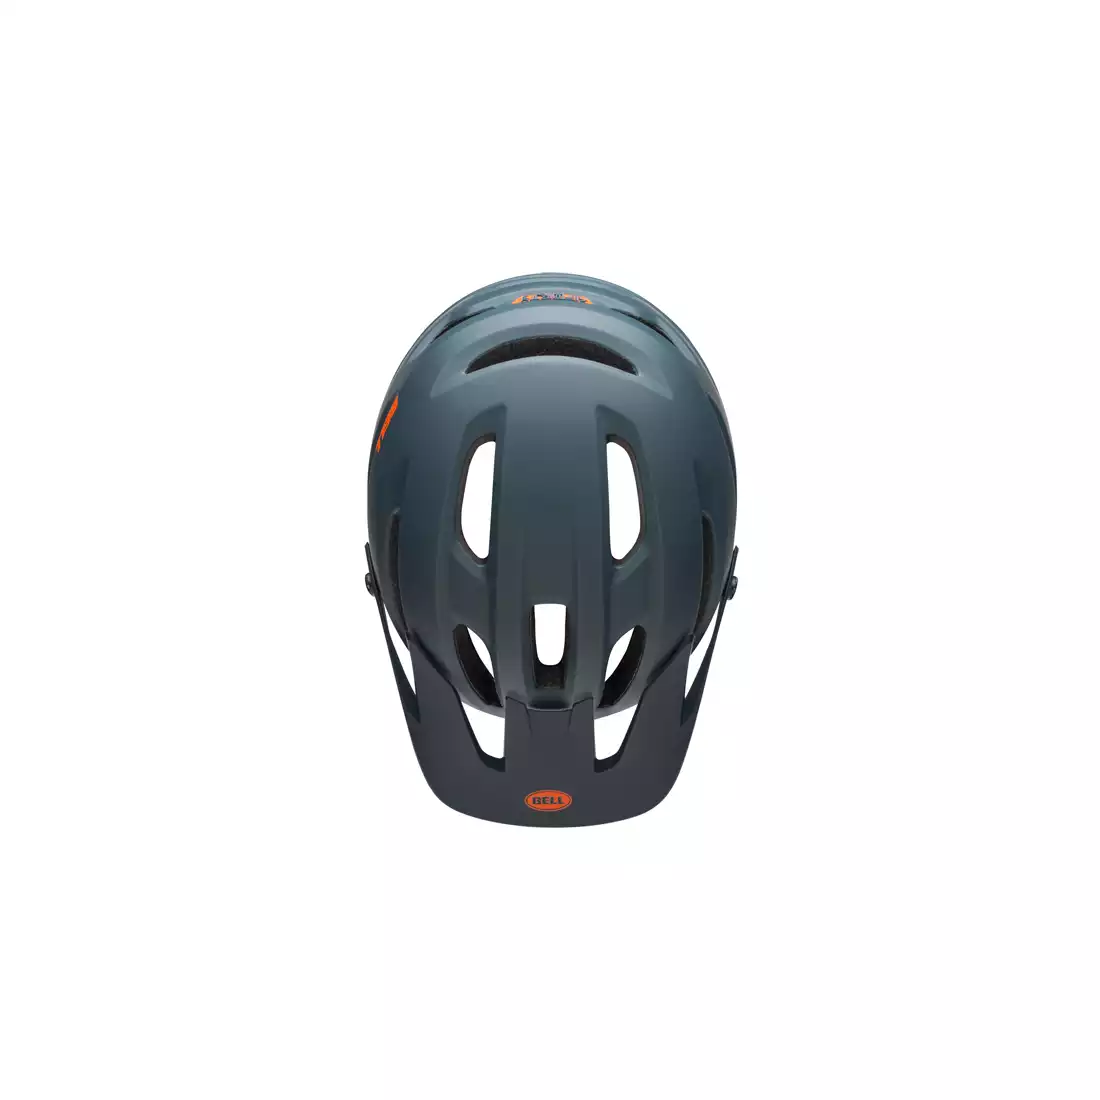 Kask rowerowy mtb BELL 4FORTY INTEGRATED MIPS cliffhanger matte gloss slate orange 